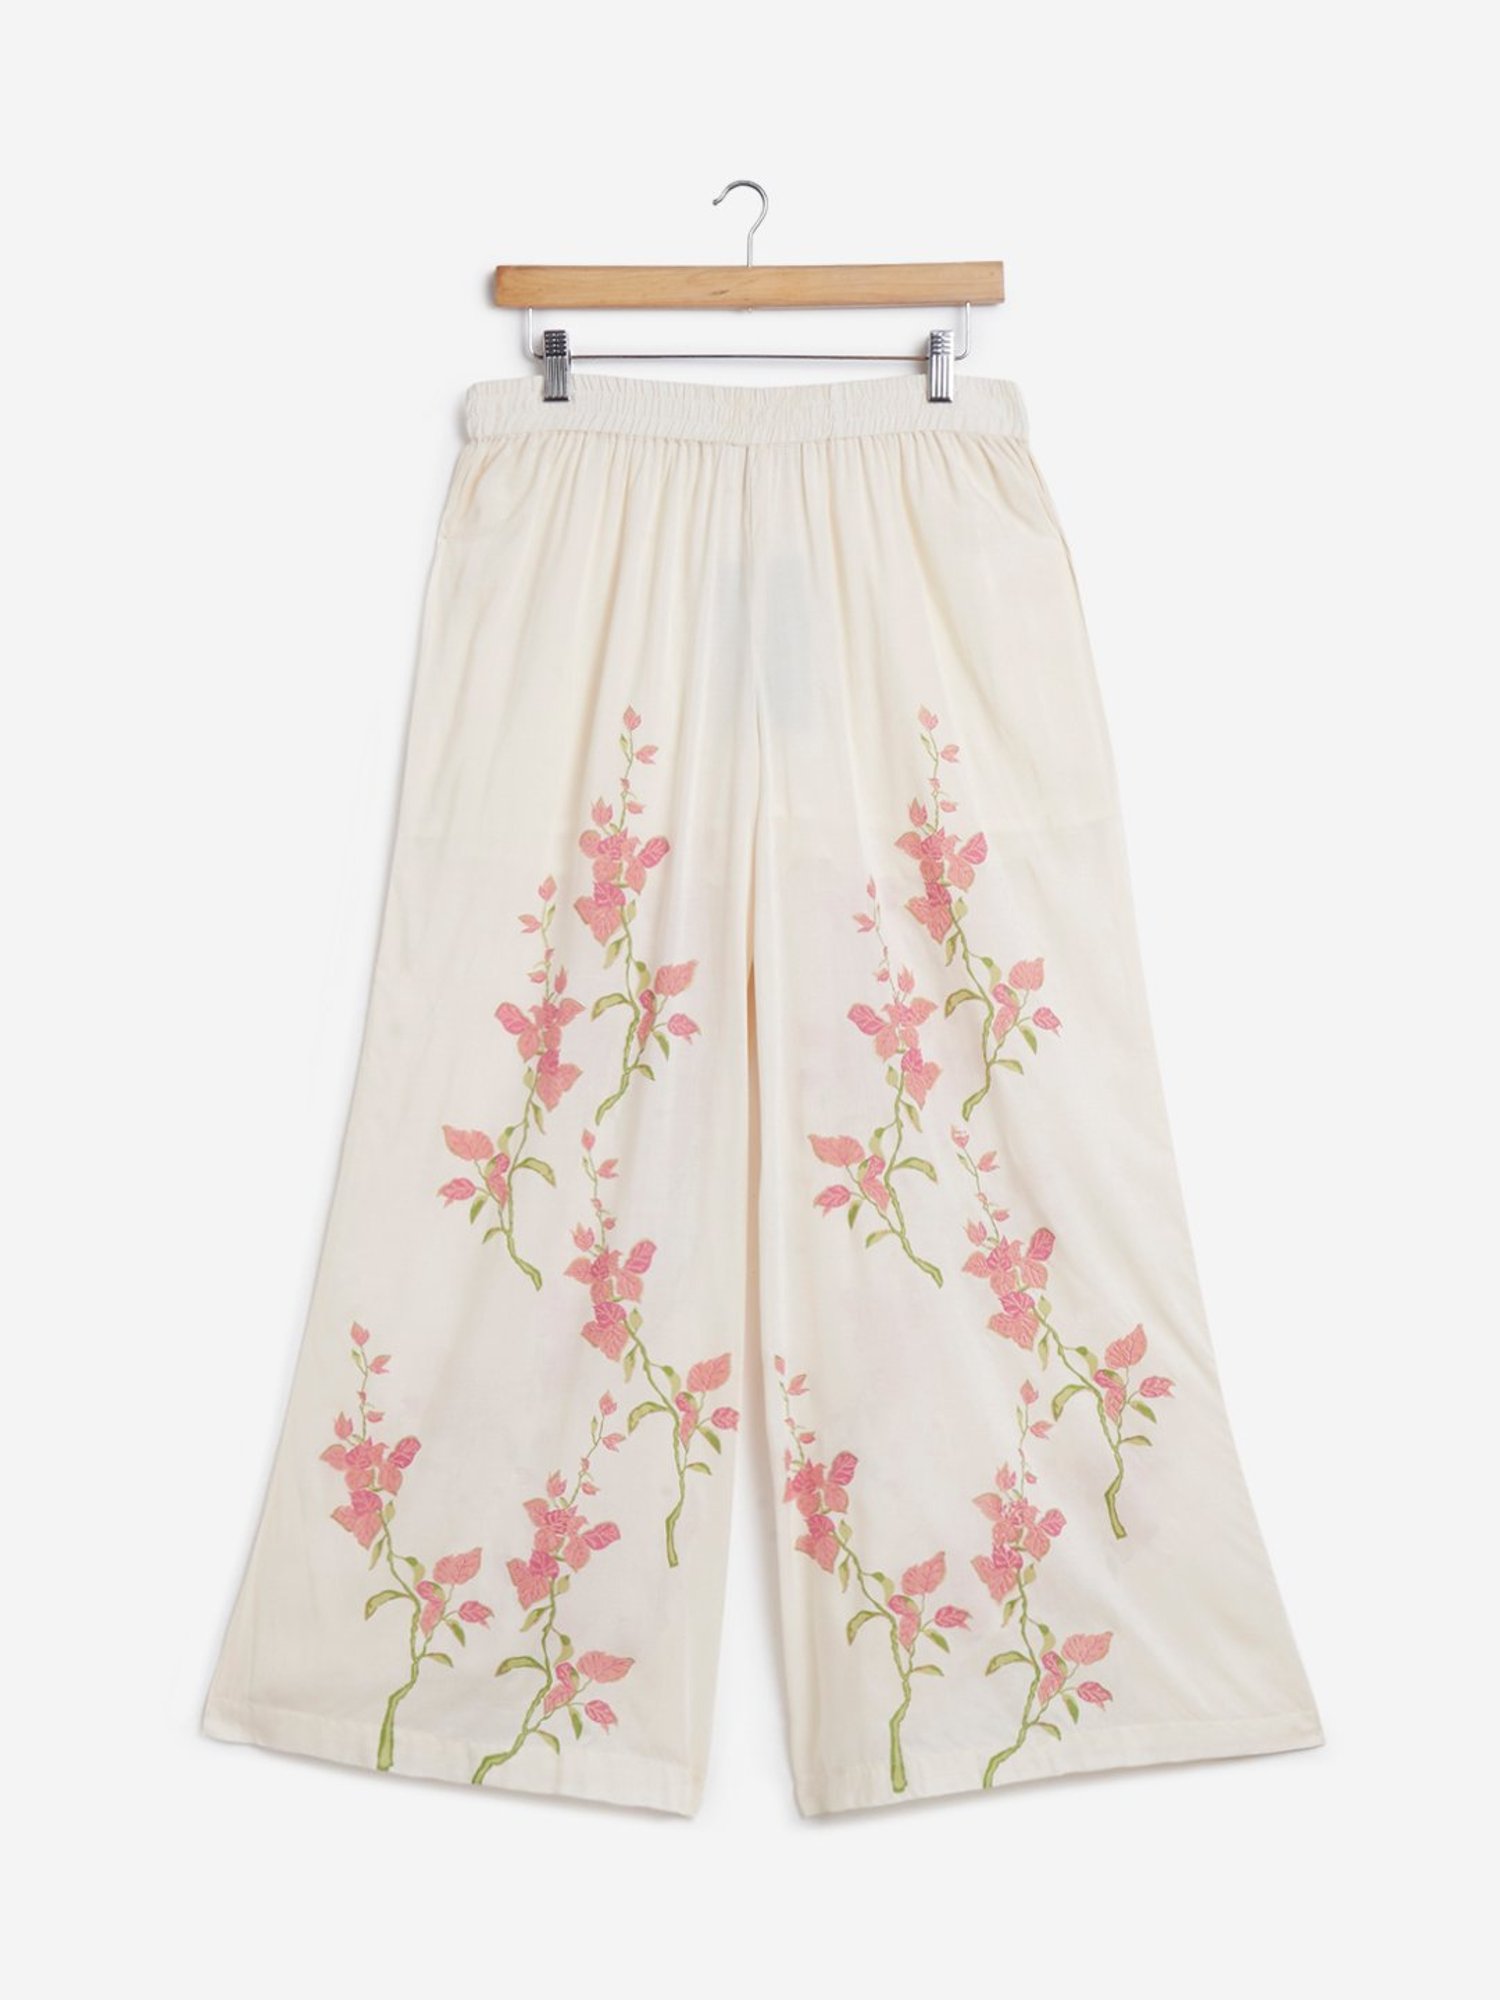 Buy Zuba Off-White Pure Cotton Floral Palazzos from Westside